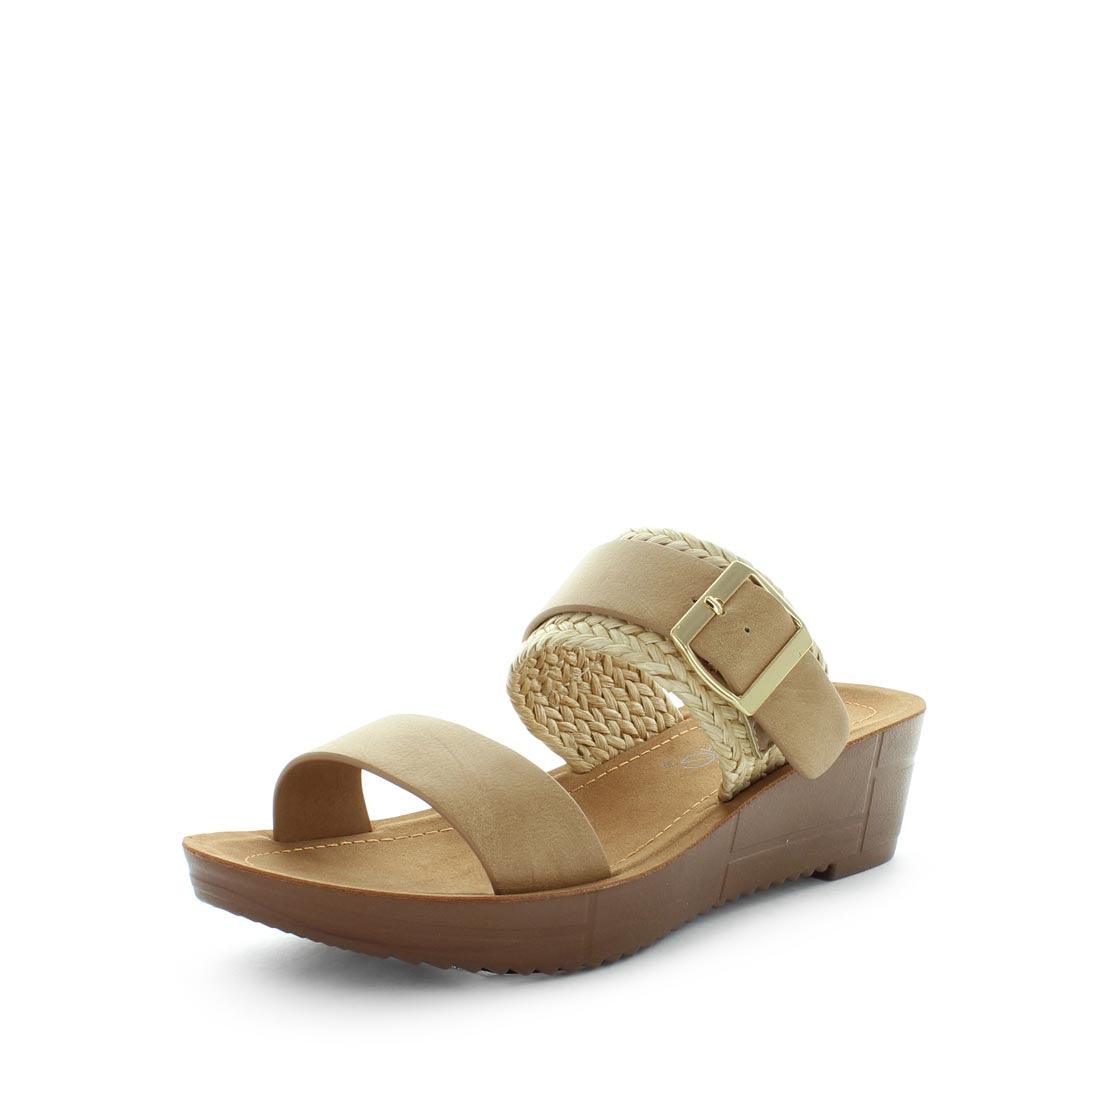 SOLLY by WILDE - iShoes - NEW ARRIVALS, What's New, What's New: Most Popular, What's New: Women's New Arrivals, Women's Shoes: Sandals - FOOTWEAR-FOOTWEAR